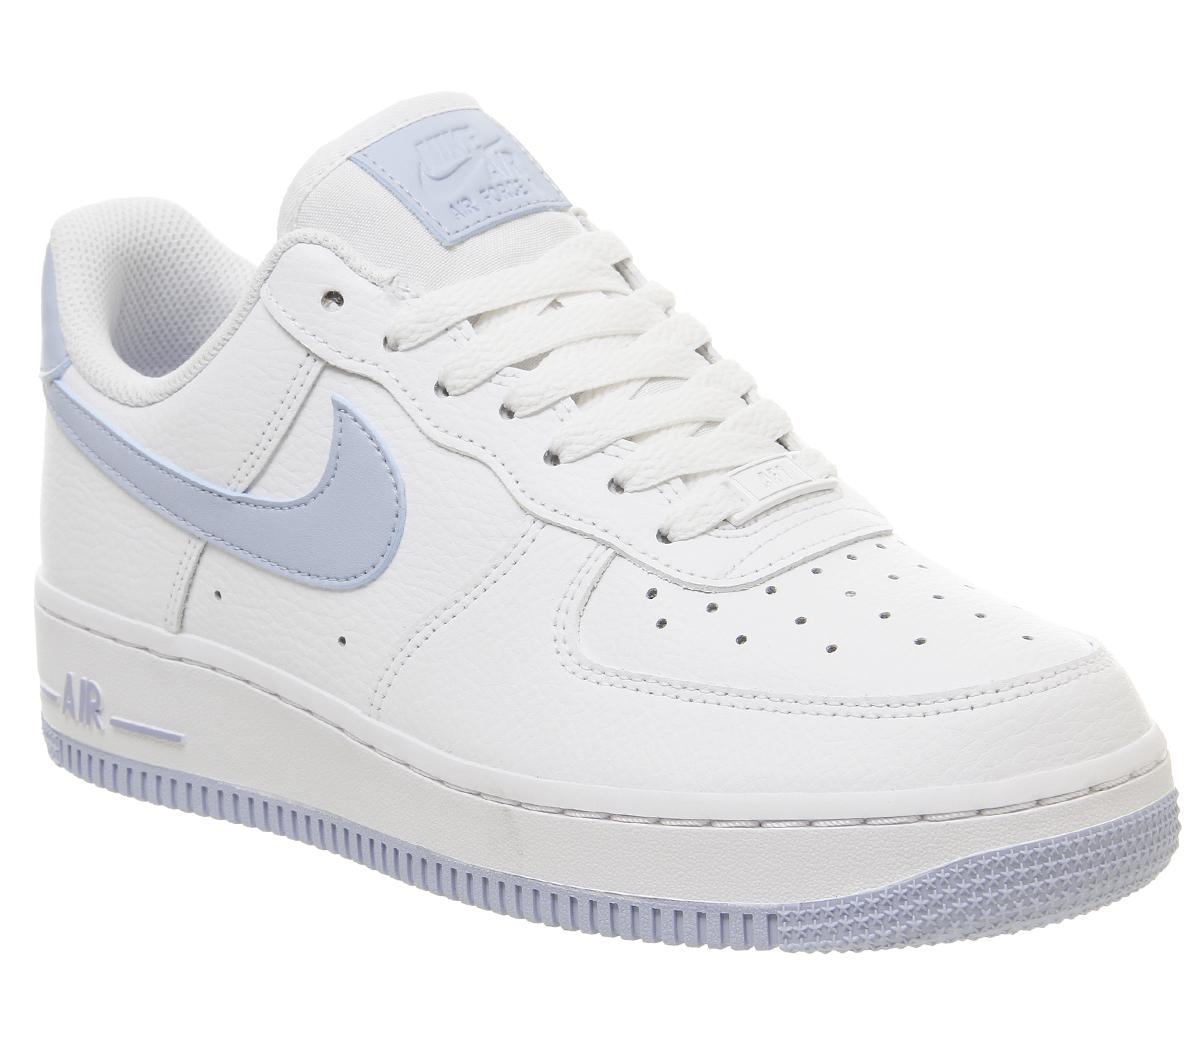 NikeAir Force 1 07 TrainersWhite Light Armory Blue